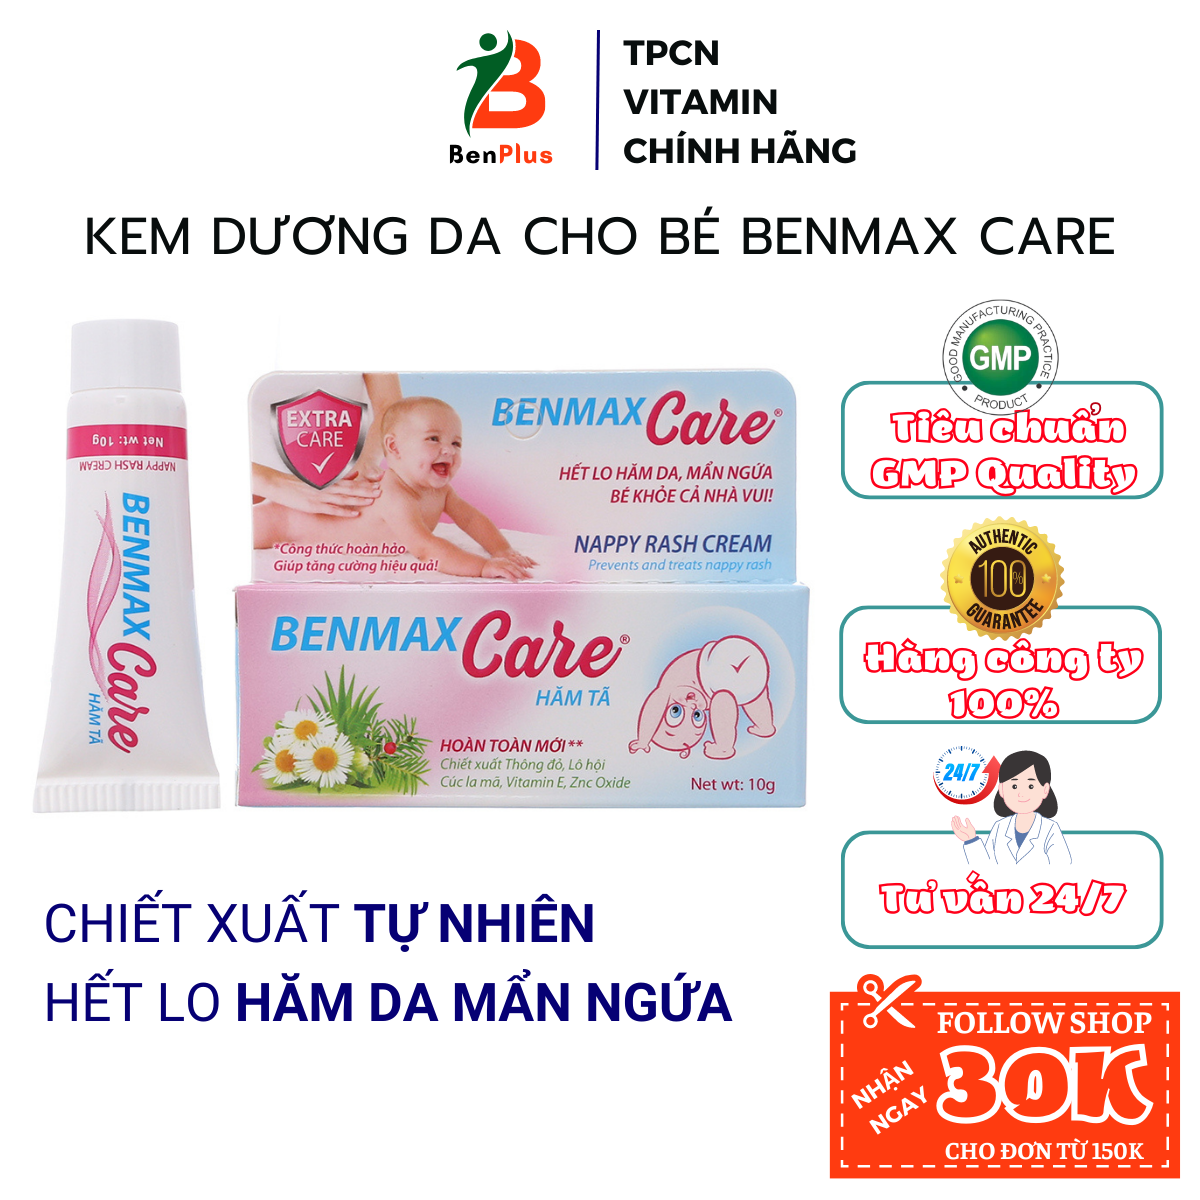 Benmax care relief skin rash relief baby skin pain relief itch relief baby